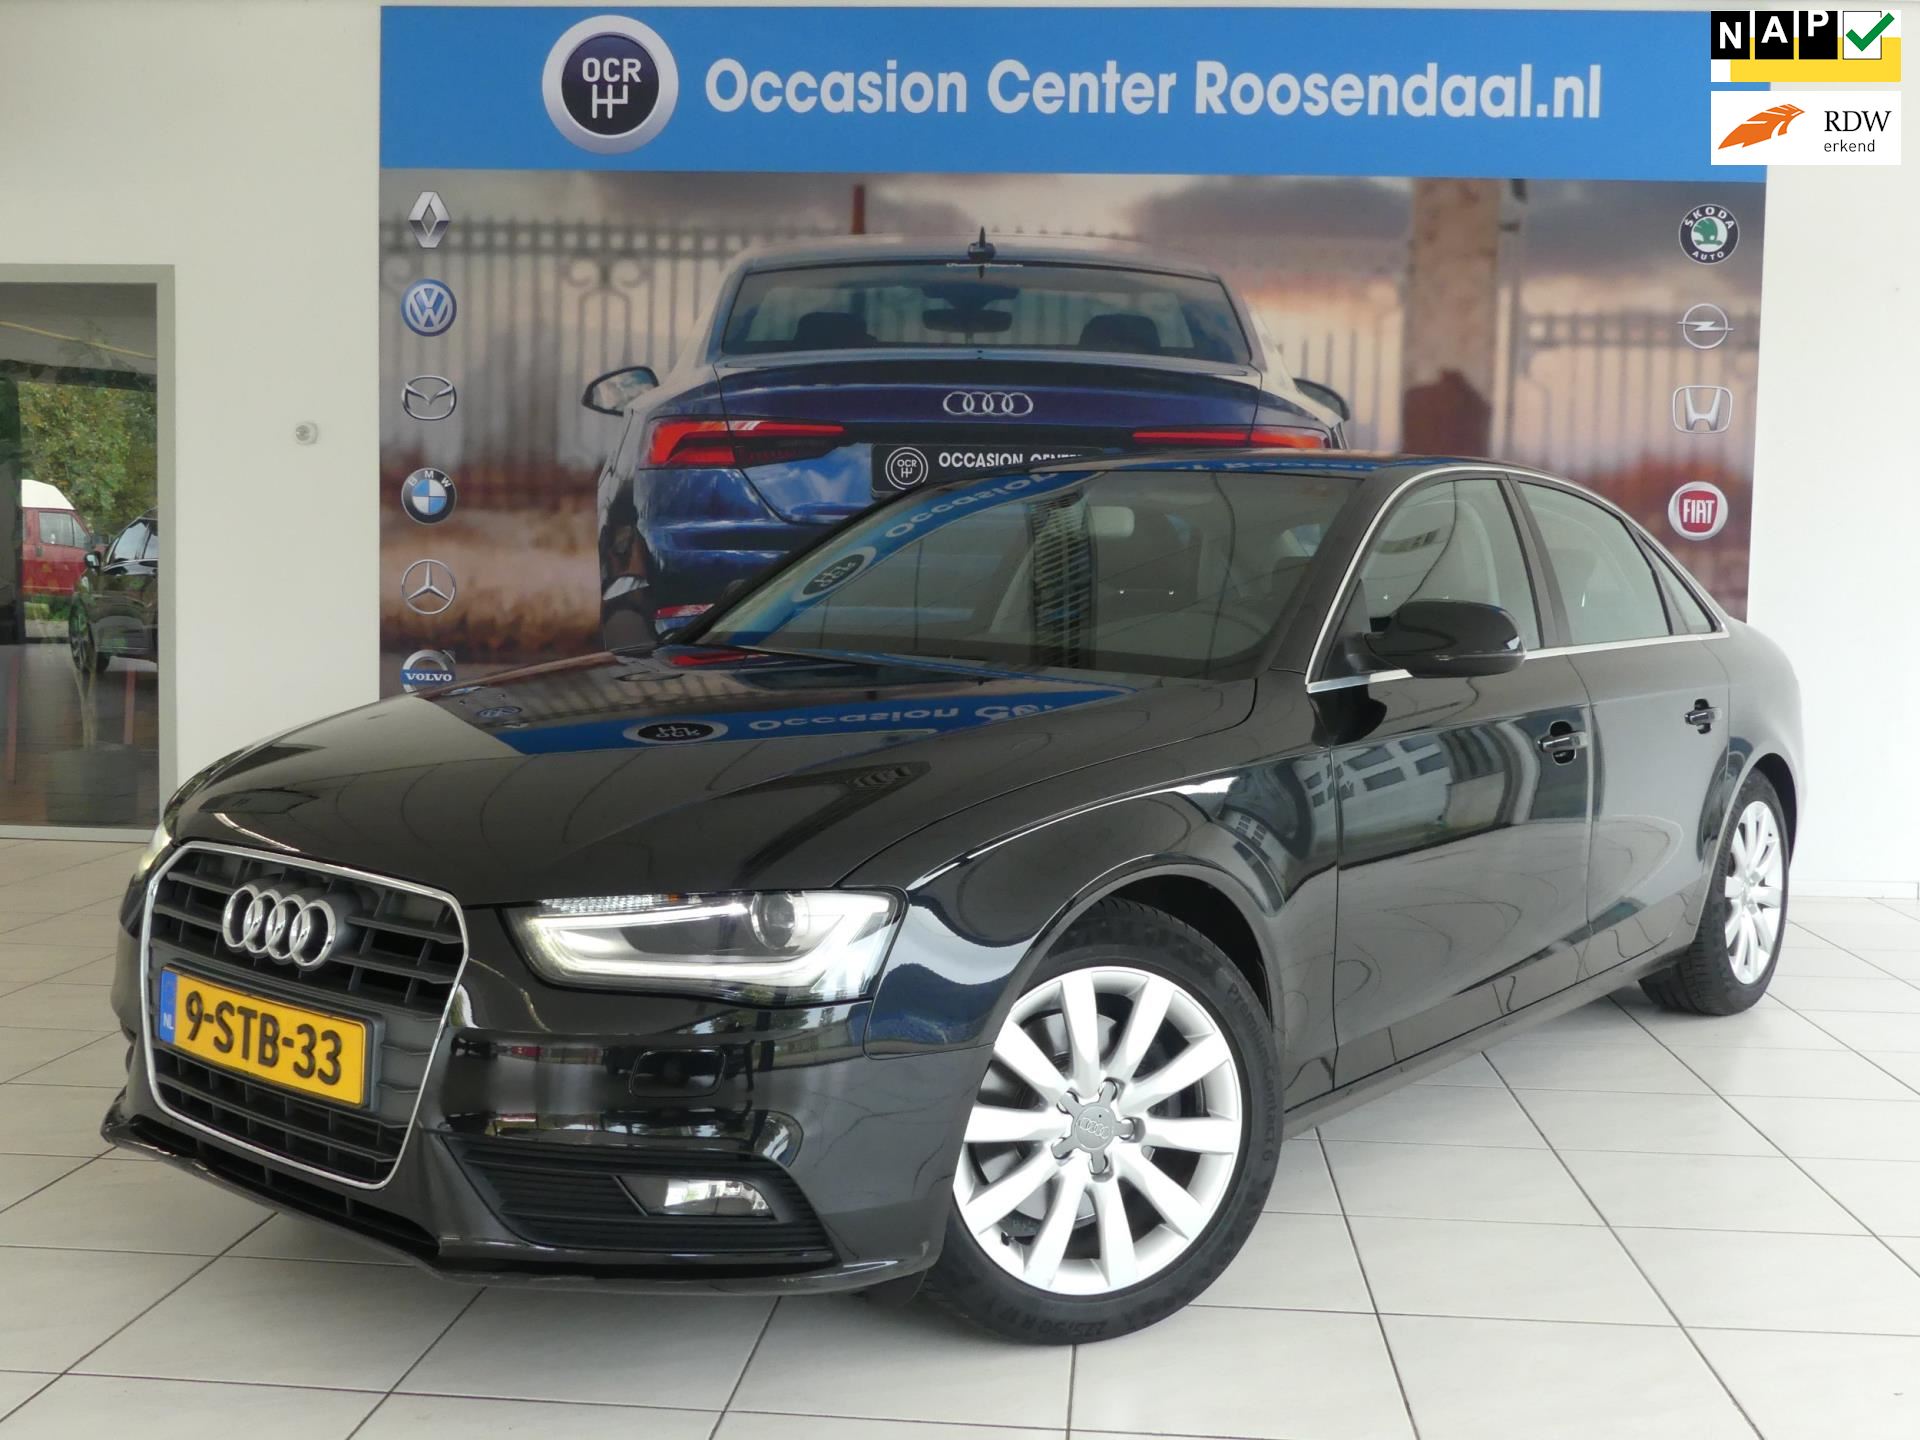 Audi A4 occasion - Occasion Center Roosendaal